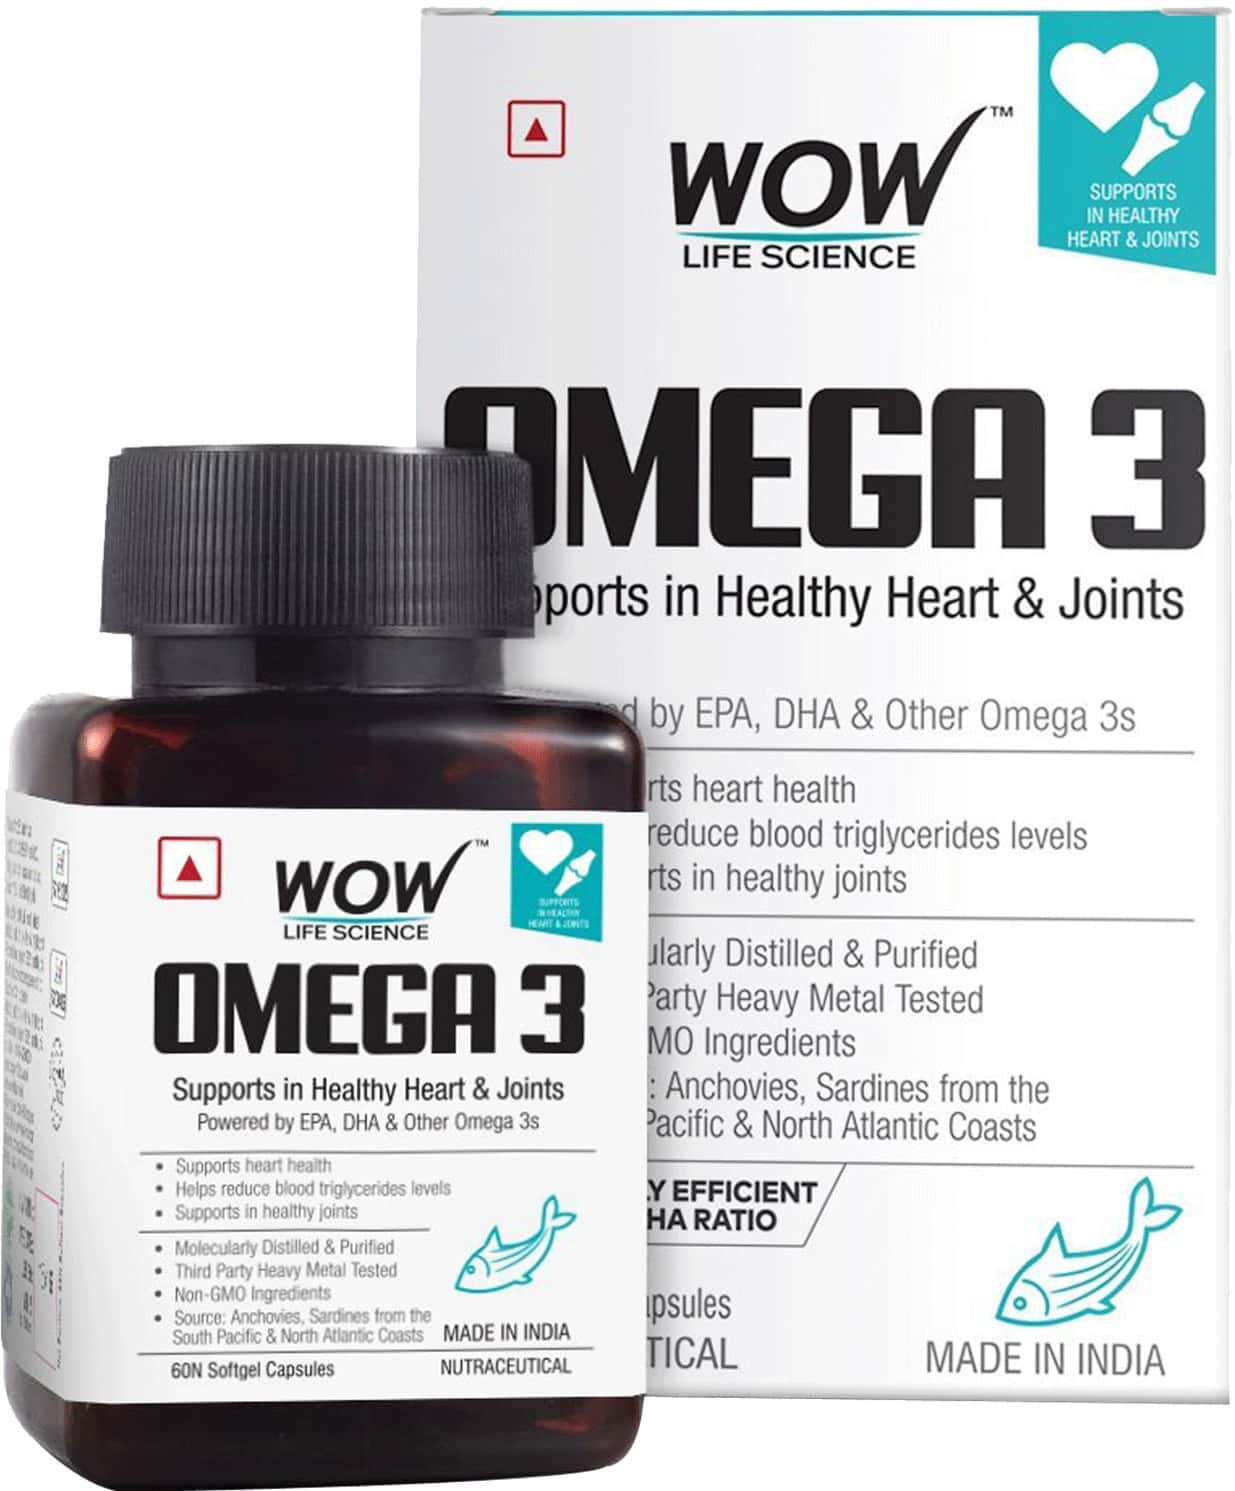 Wow Life Science Omega 3 Capsules Bottle Of 60